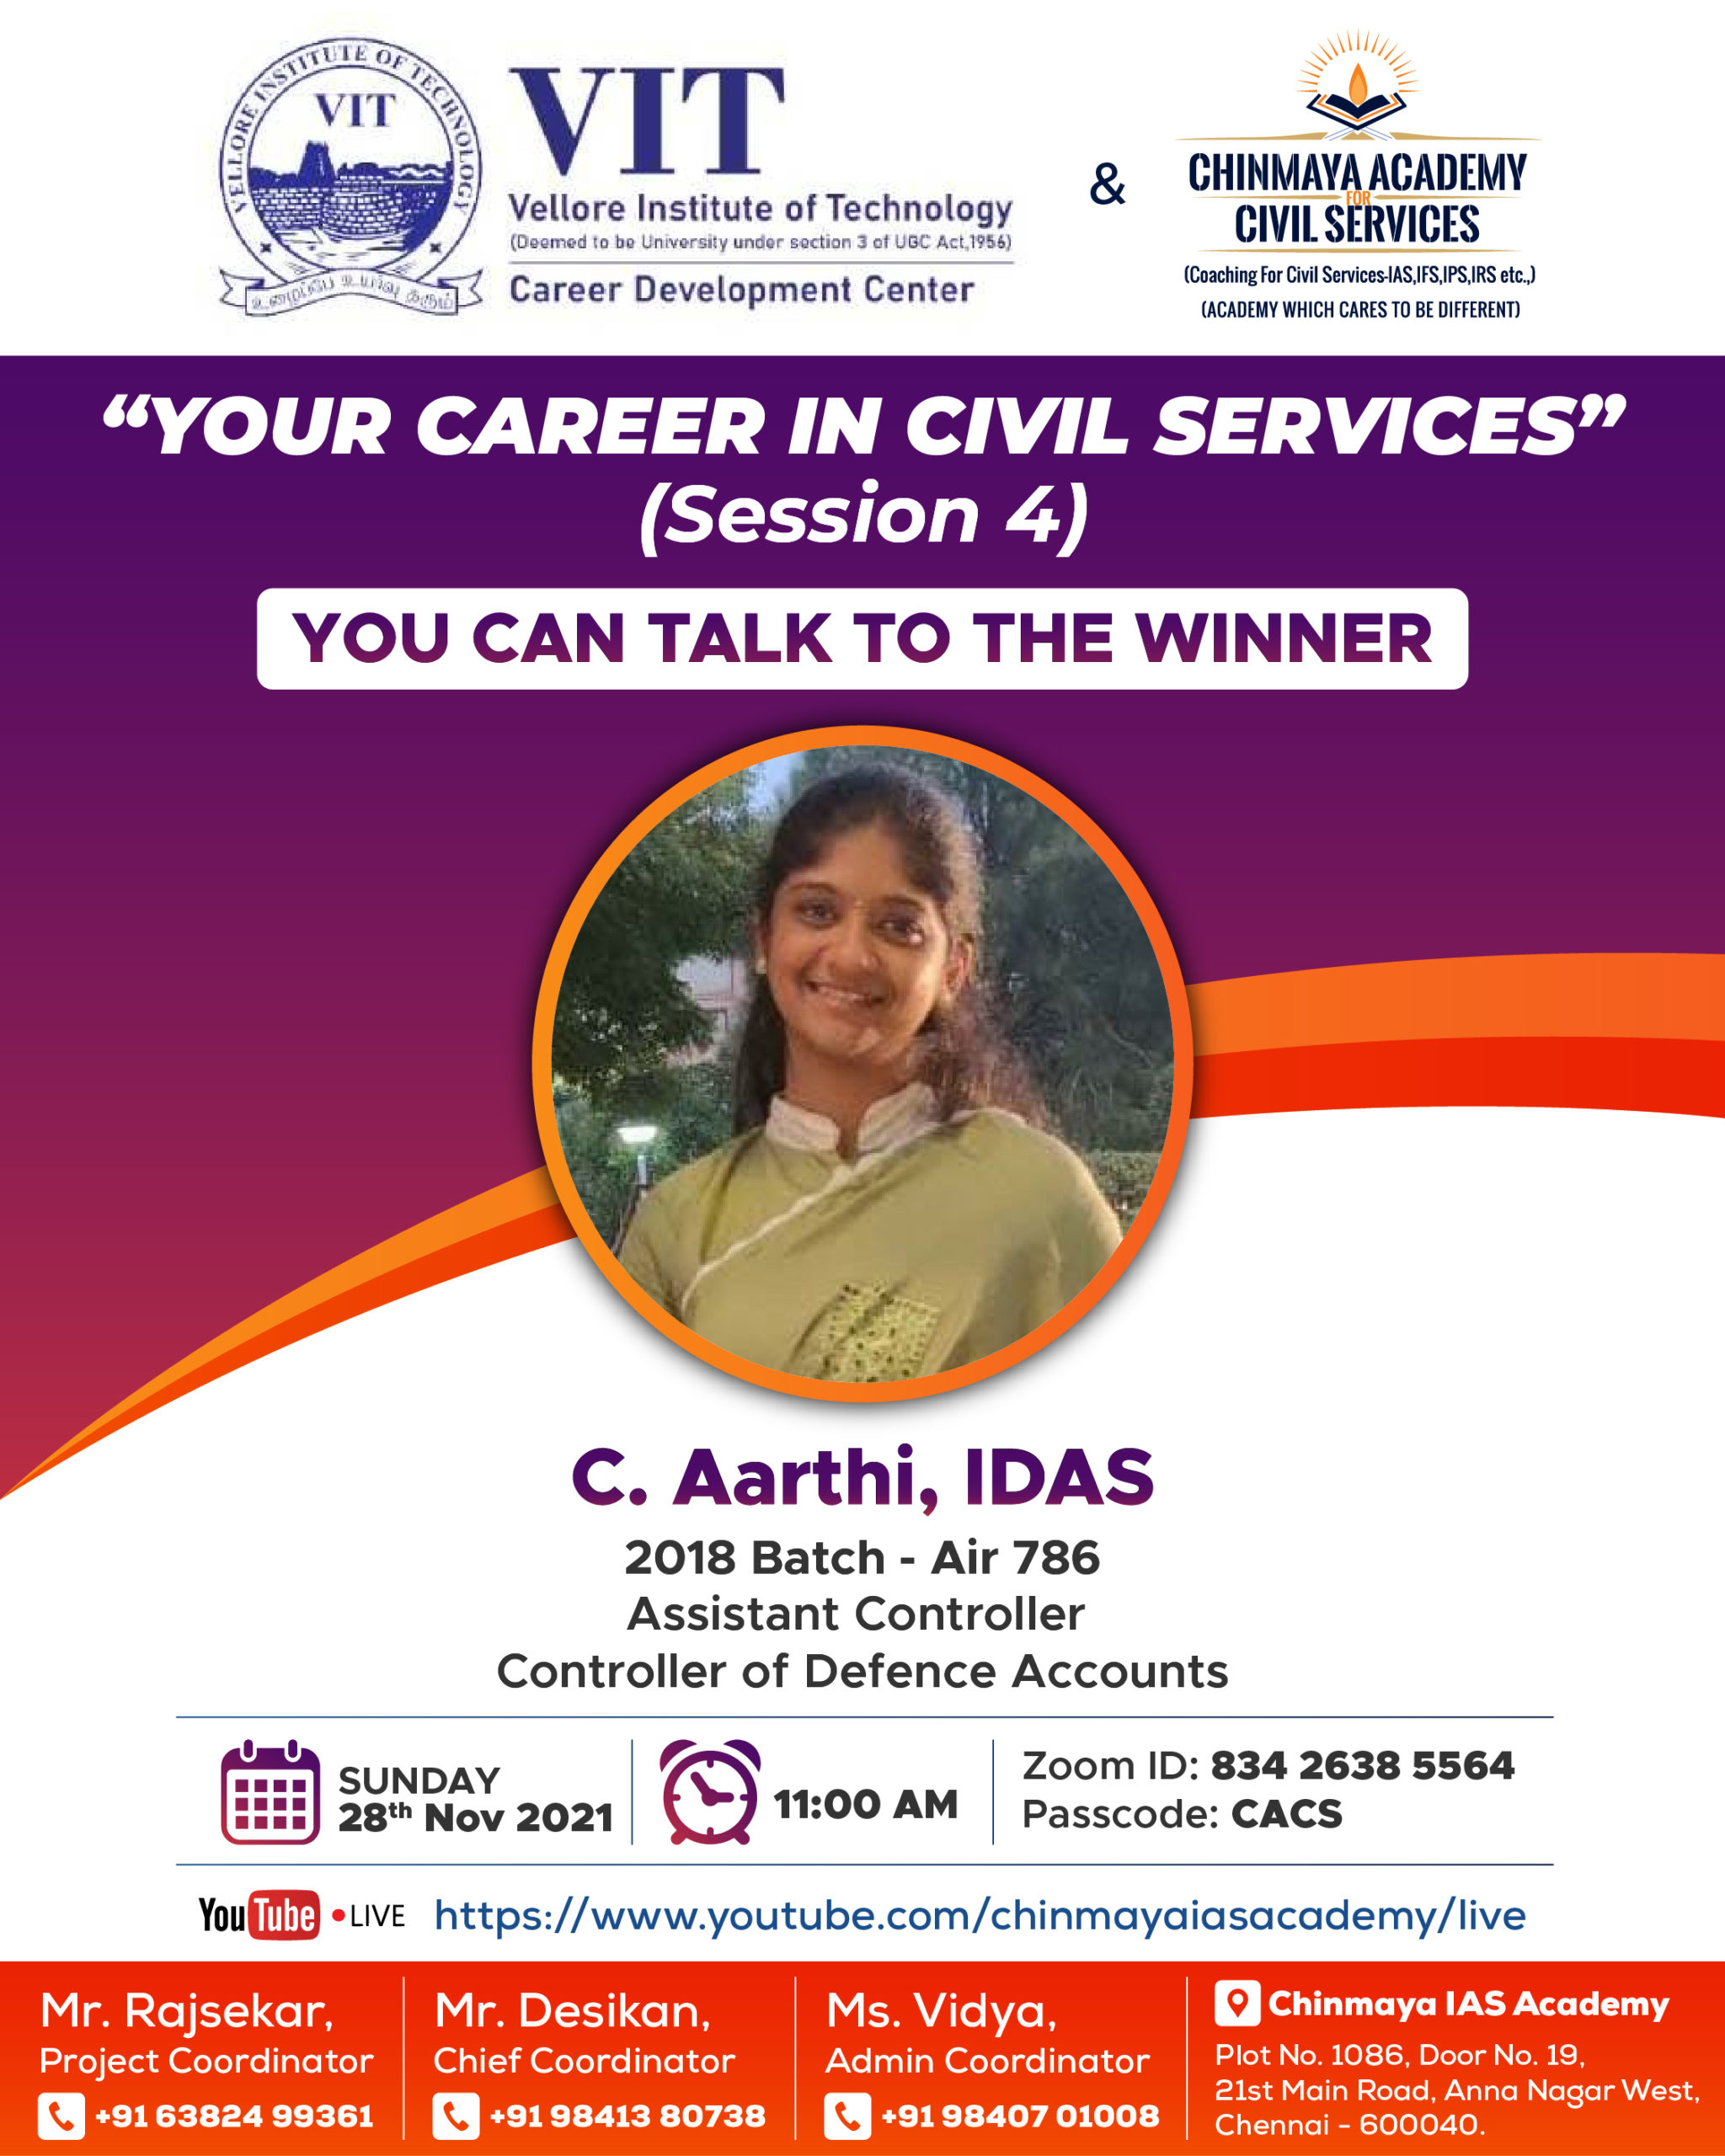 poster on your career in civil services session 4 by Chinmaya IAS Academy